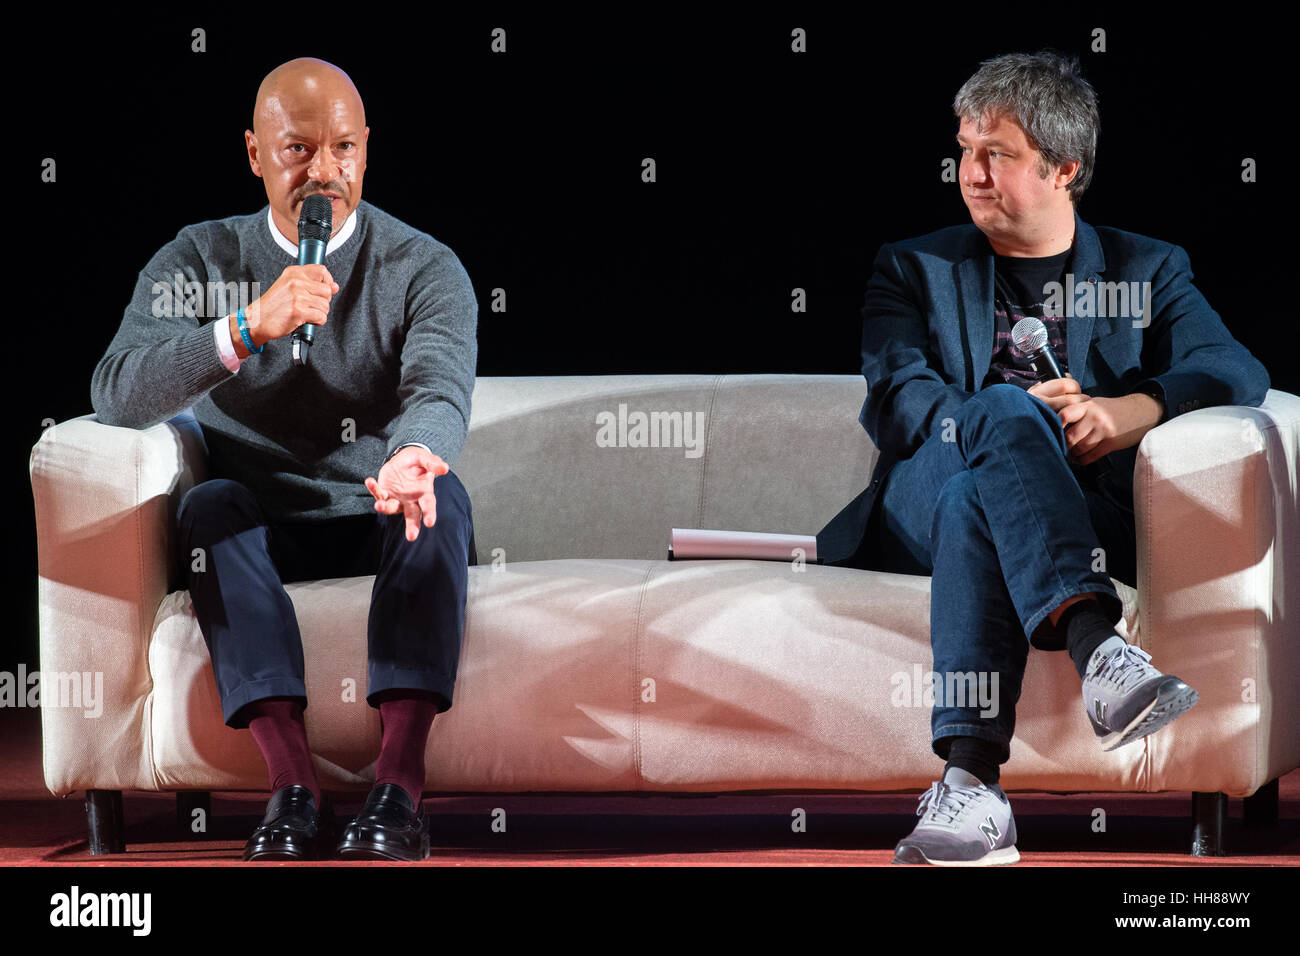 Moscow, Russia. 17th Jan, 2017. Film director Fyodor Bondarchuk(left) and film critic Anton Dolin(right) at the lecture 'The attraction: Under the sign of secrecy' in the cinema 'October'. Credit: Victor Vytolskiy/Alamy Live News Stock Photo